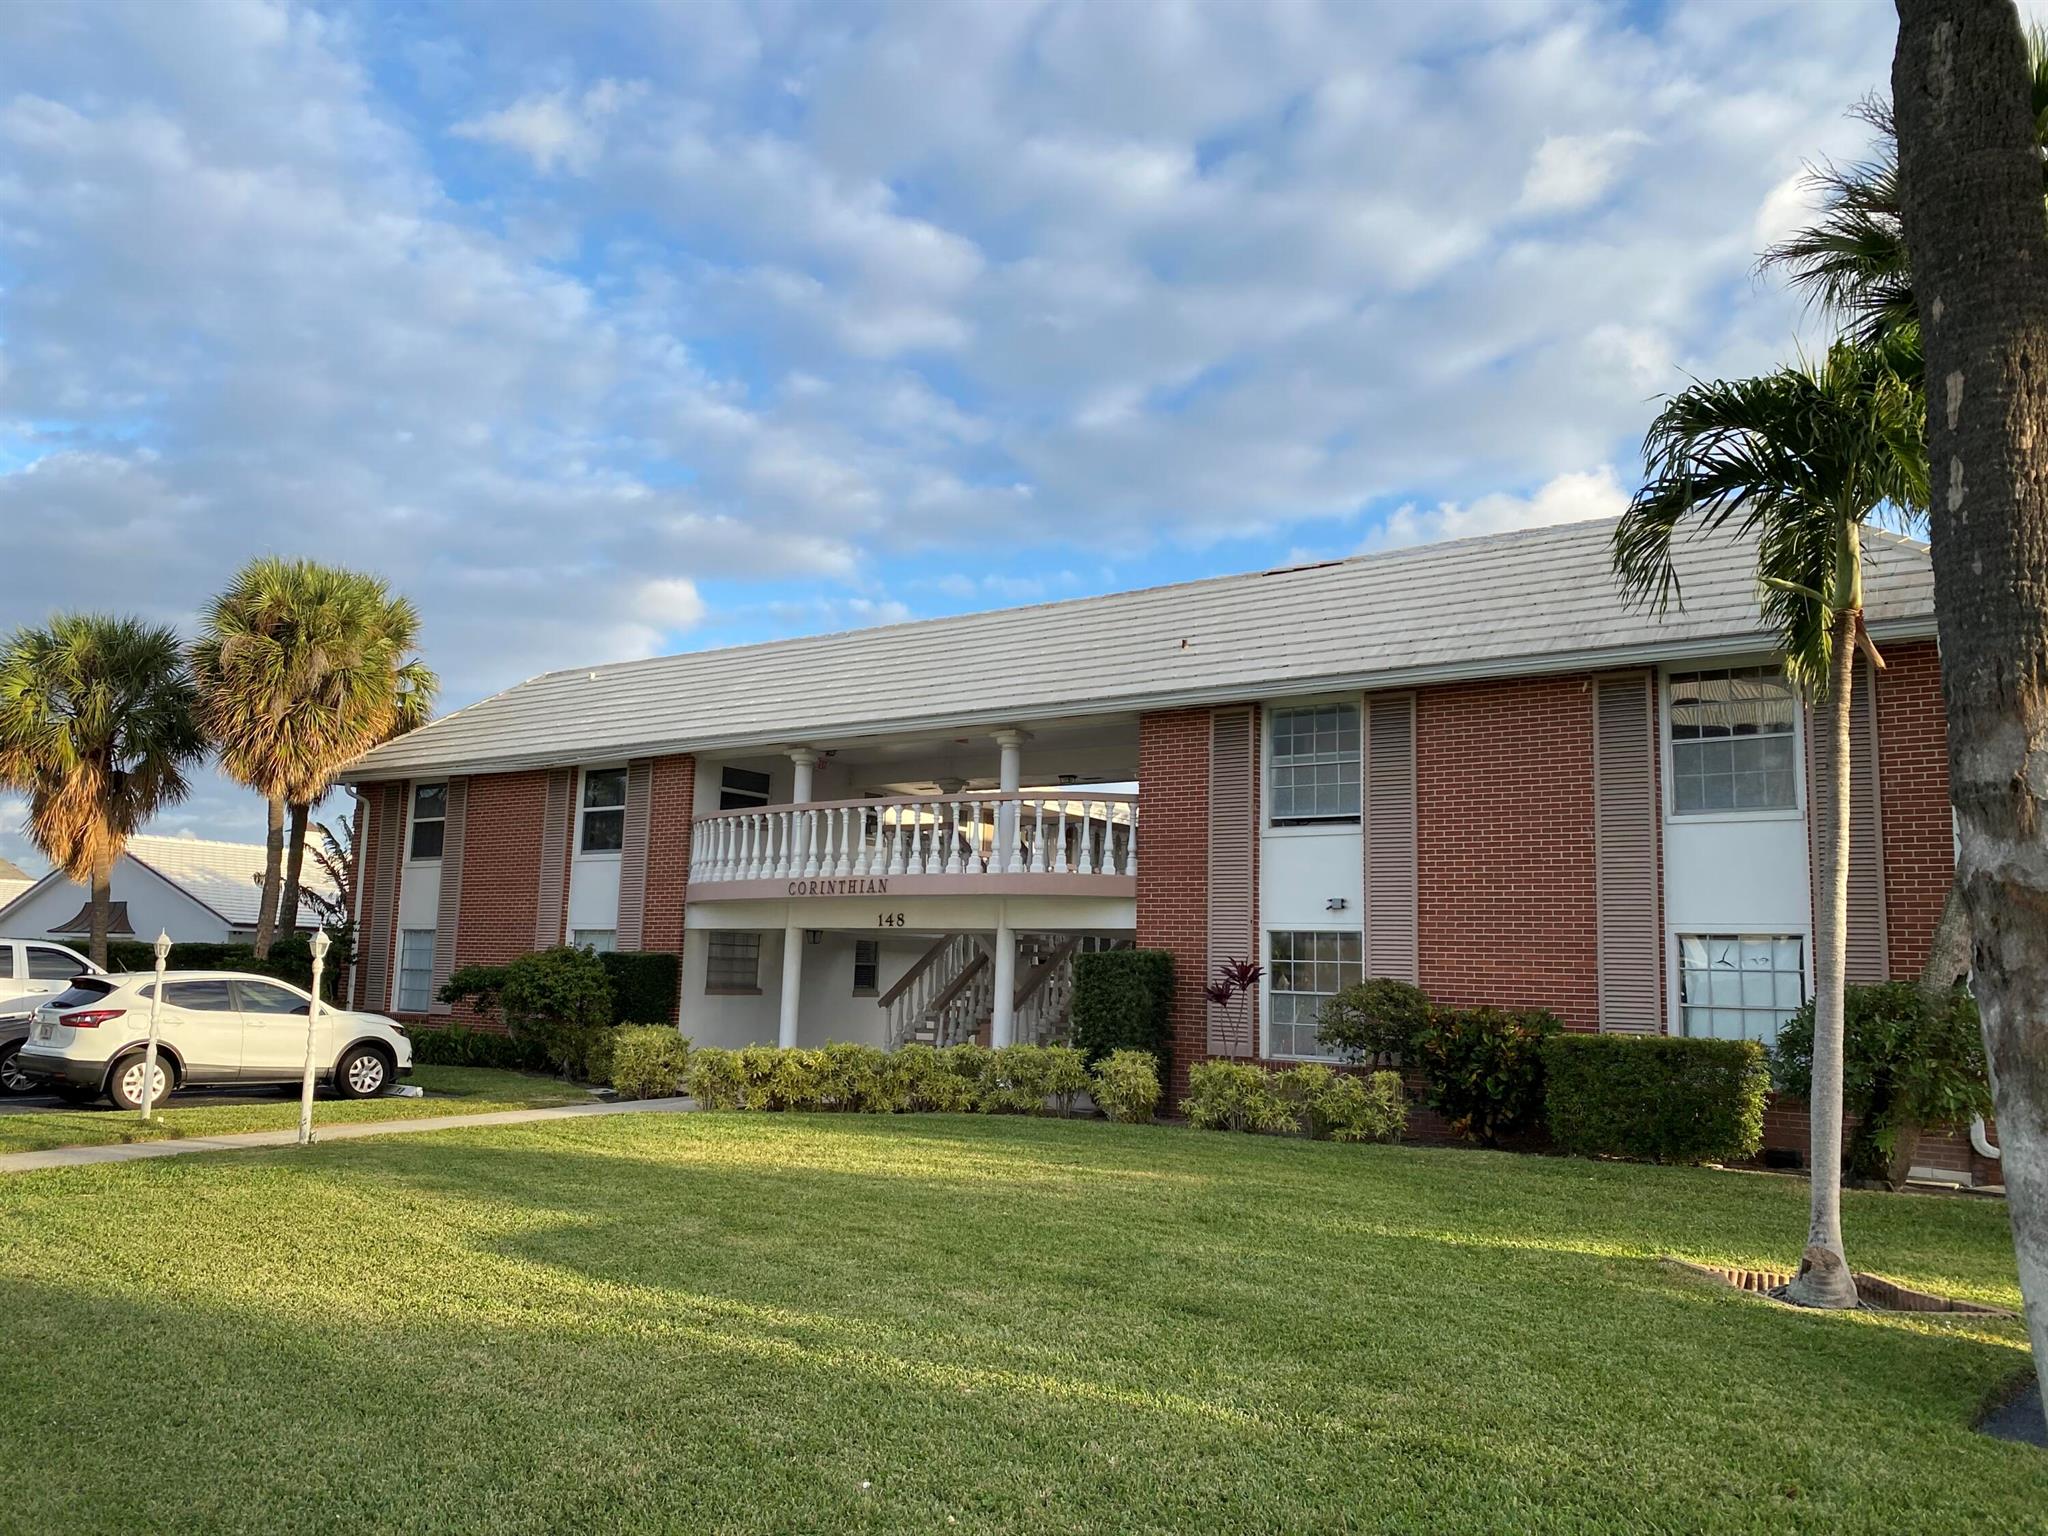 Completely remodeled 1/1 condo located next to the North Palm Beach Marina and within walking distance to the North Palm Beach Country Club. This elegant unit has all the upgrades: New shaker style kitchen cabinets with automatic soft close drawers, granite counter tops, oversized stainless-steel sink, LED lighting and recent kitchen appliances. You will enjoy this 1st floor unit with new knock down ceilings, LED remote control fans, ceramic tile throughout and new bathroom vanity and faucets. The oversized Master bedroom has a large walk-in closet and the unit has an additional outside owners closet for your bikes and golf clubs. Step outside to your courtyard patio or head to the community pool that is just steps away.